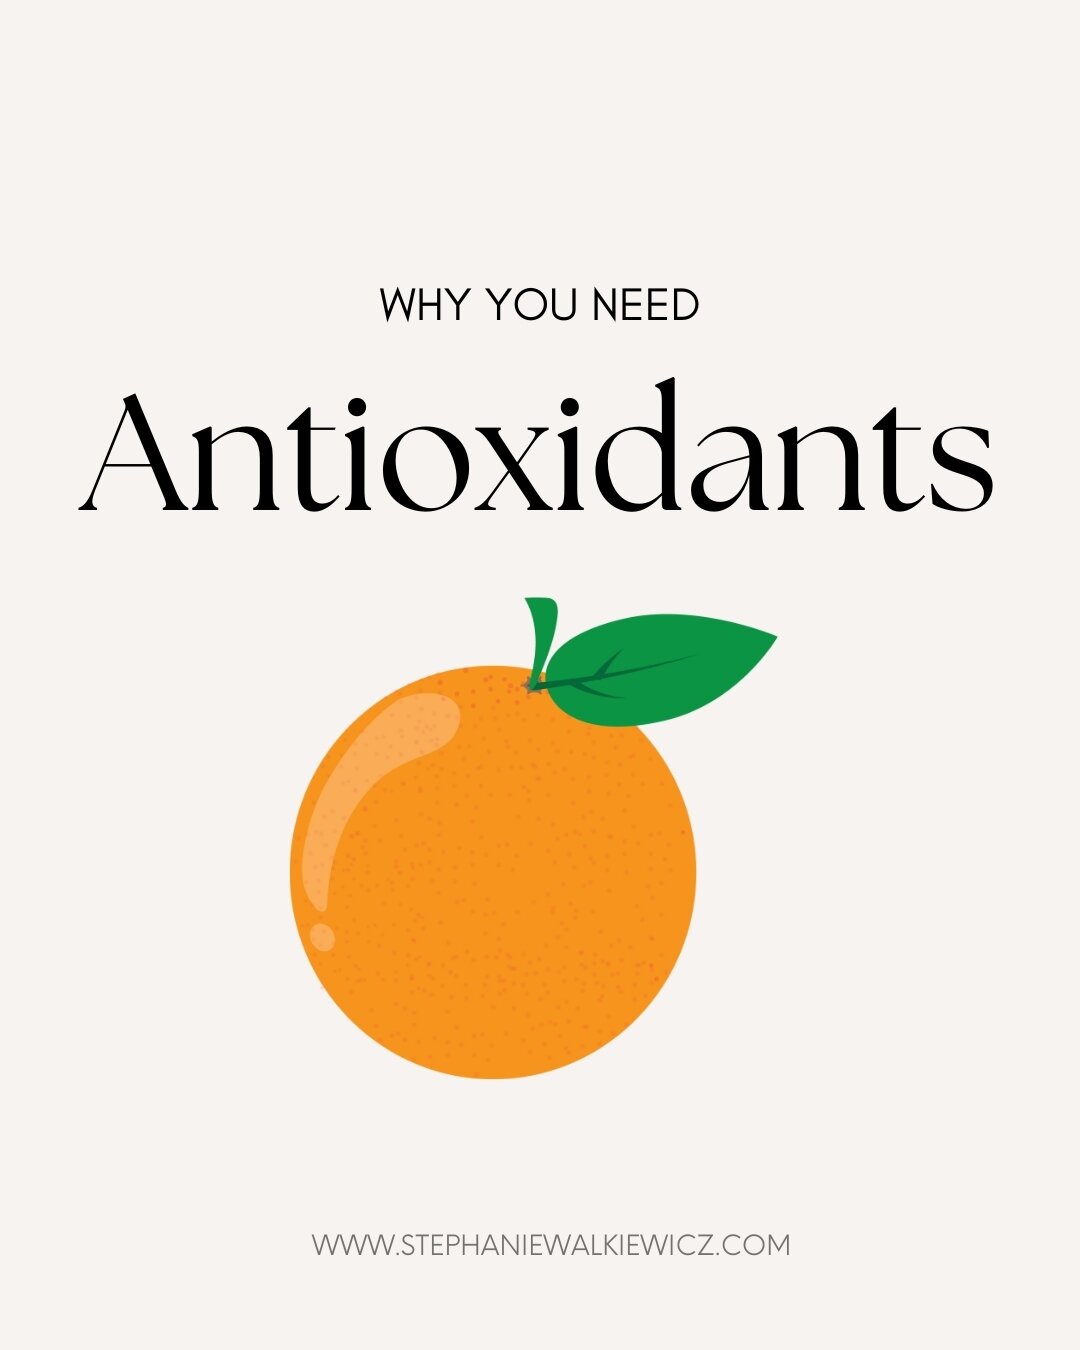 Aging or sun damaged skin needs antioxidants topically AND orally!  Antioxidants help protect the body from free radicals... and while a healthy diet won't guarantee perfect skin, it will certainly help.

Here are some quick ways to up the antioxidan